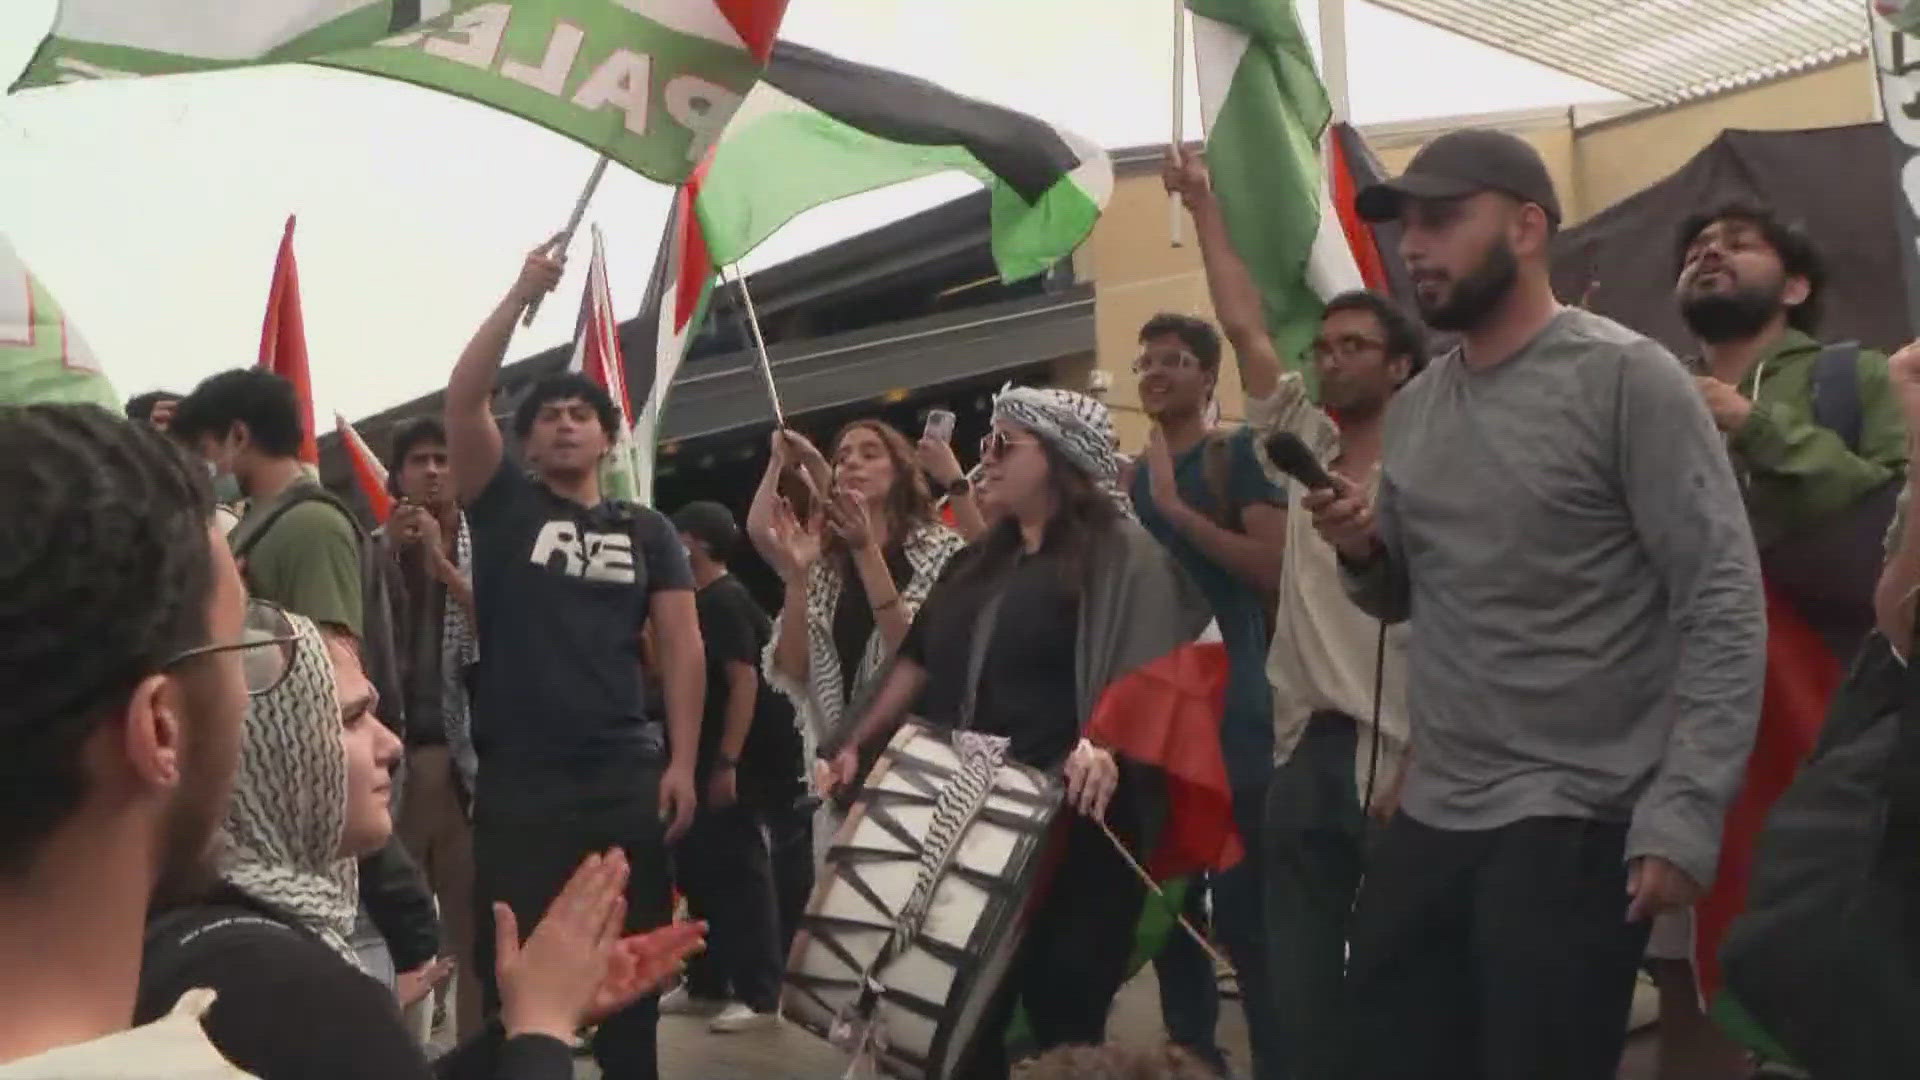 The pro-Palestinian protestors staged an encampment Wednesday. The protest was broken up by law enforcement Wednesday afternoon.